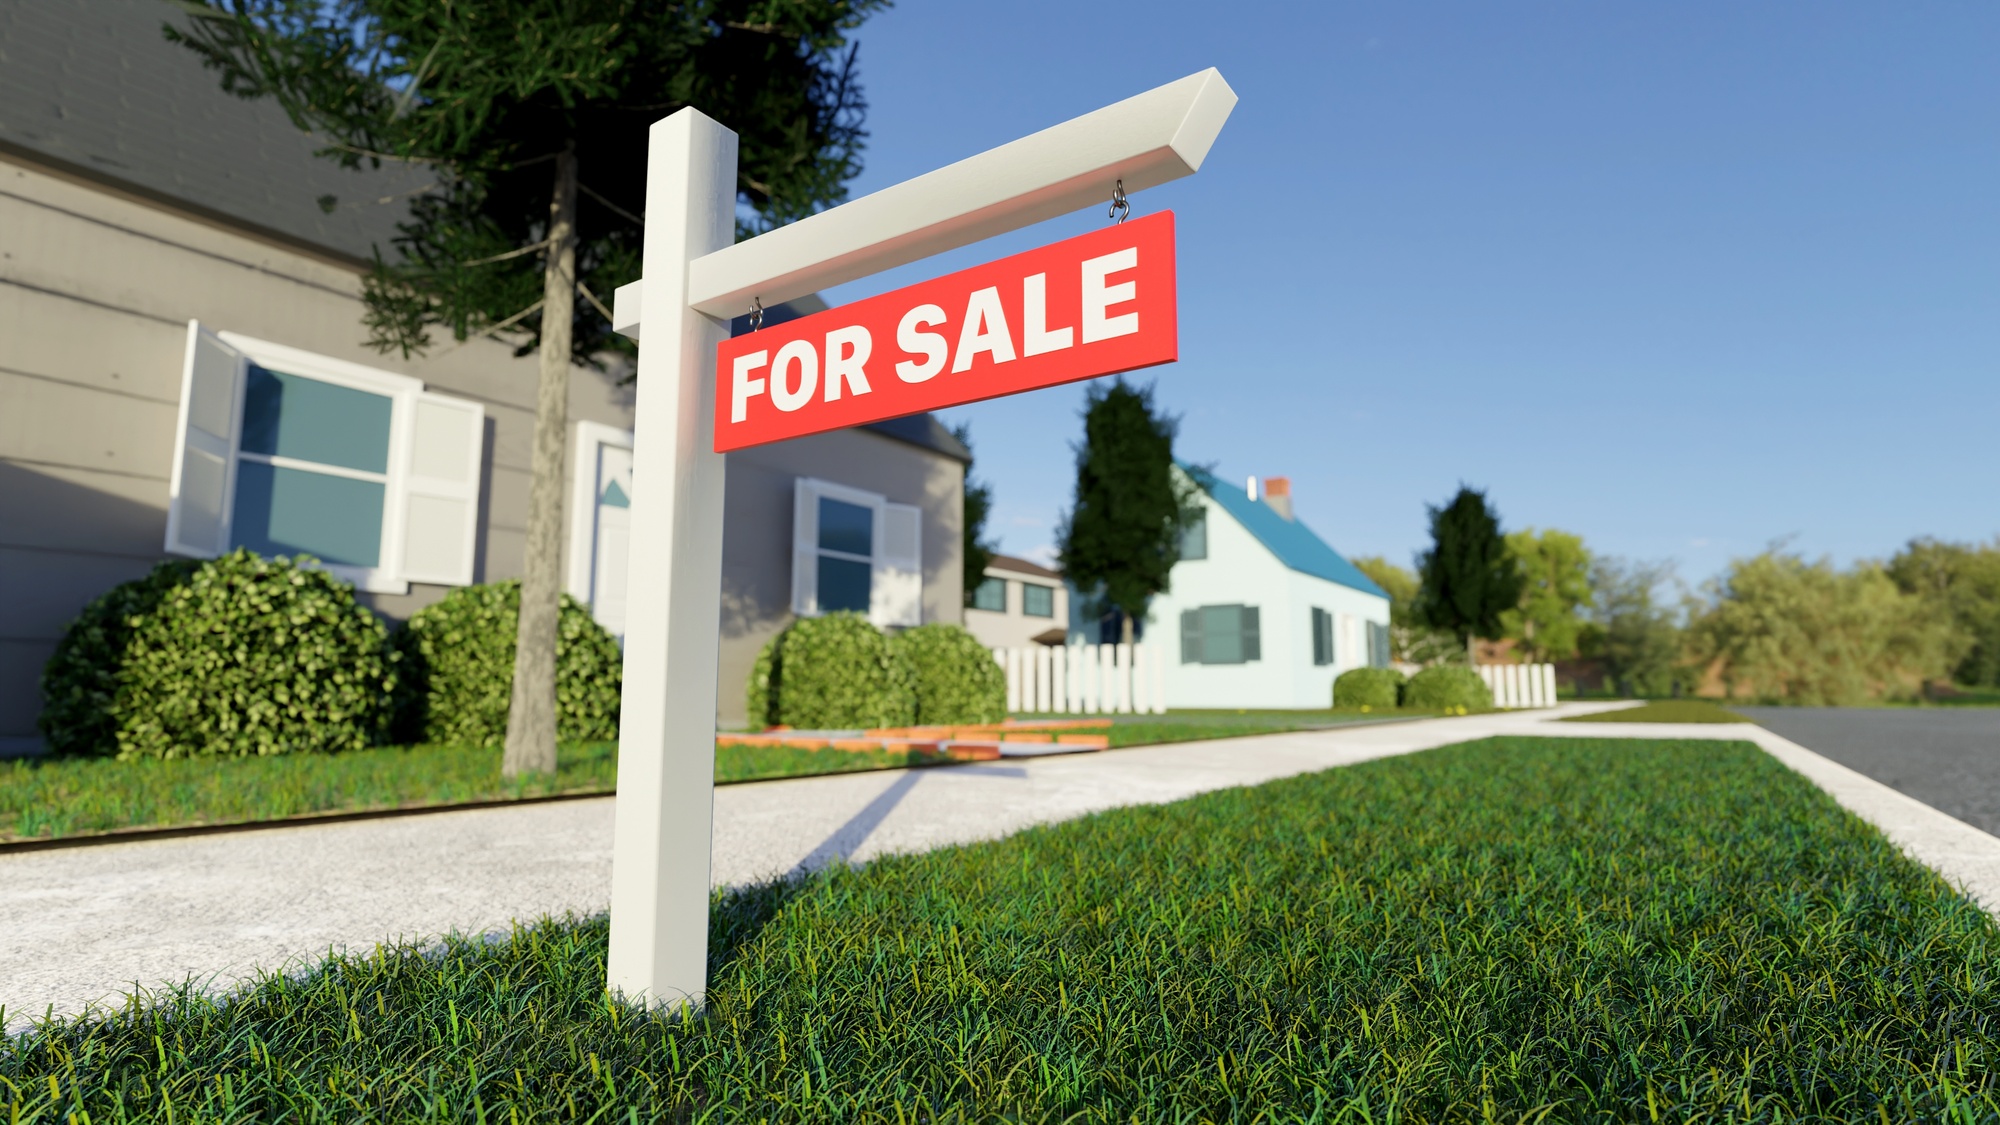 Real estate sign in front of a house for sale in a nice suburban